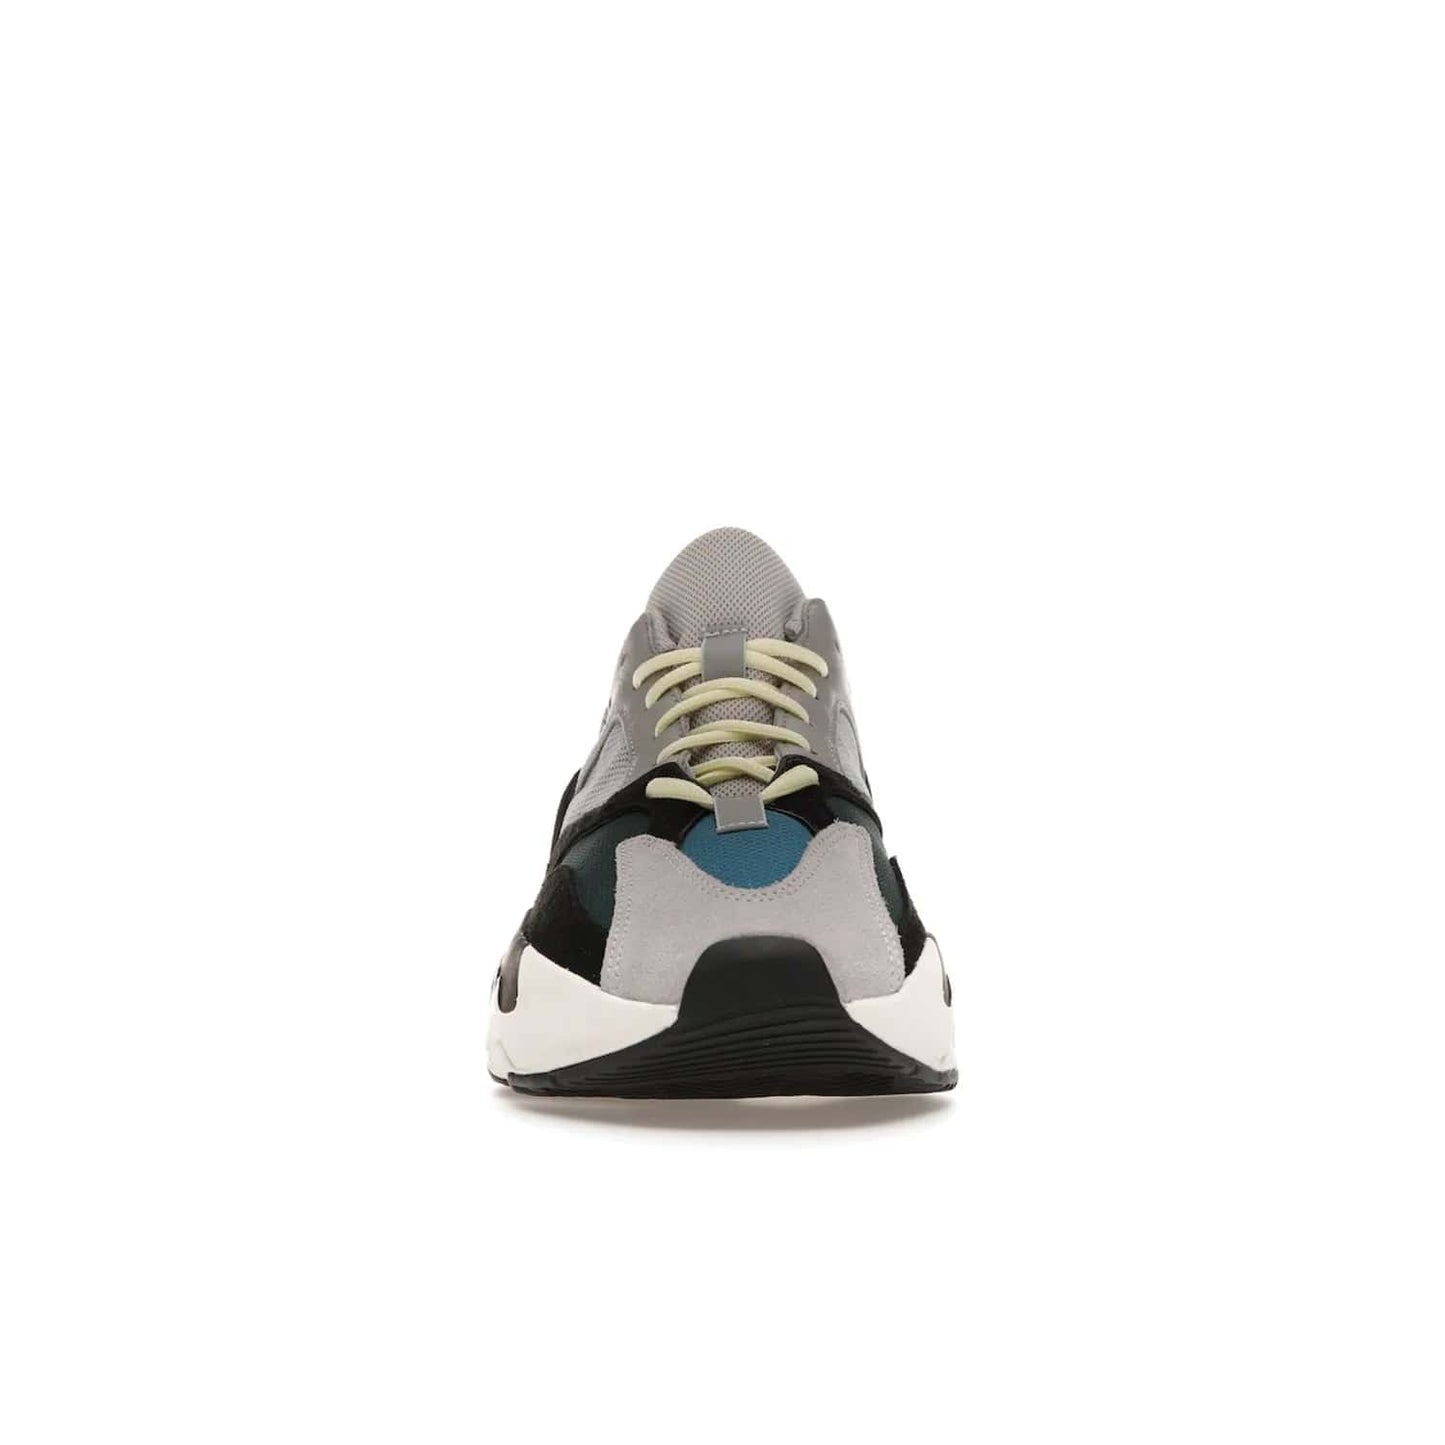 adidas Yeezy Boost 700 Wave Runner - Image 10 - Only at www.BallersClubKickz.com - Shop the iconic adidas Yeezy Boost 700 Wave Runner. Featuring grey mesh and leather upper, black suede overlays, teal mesh underlays, and signature Boost sole. Be bold & make a statement.